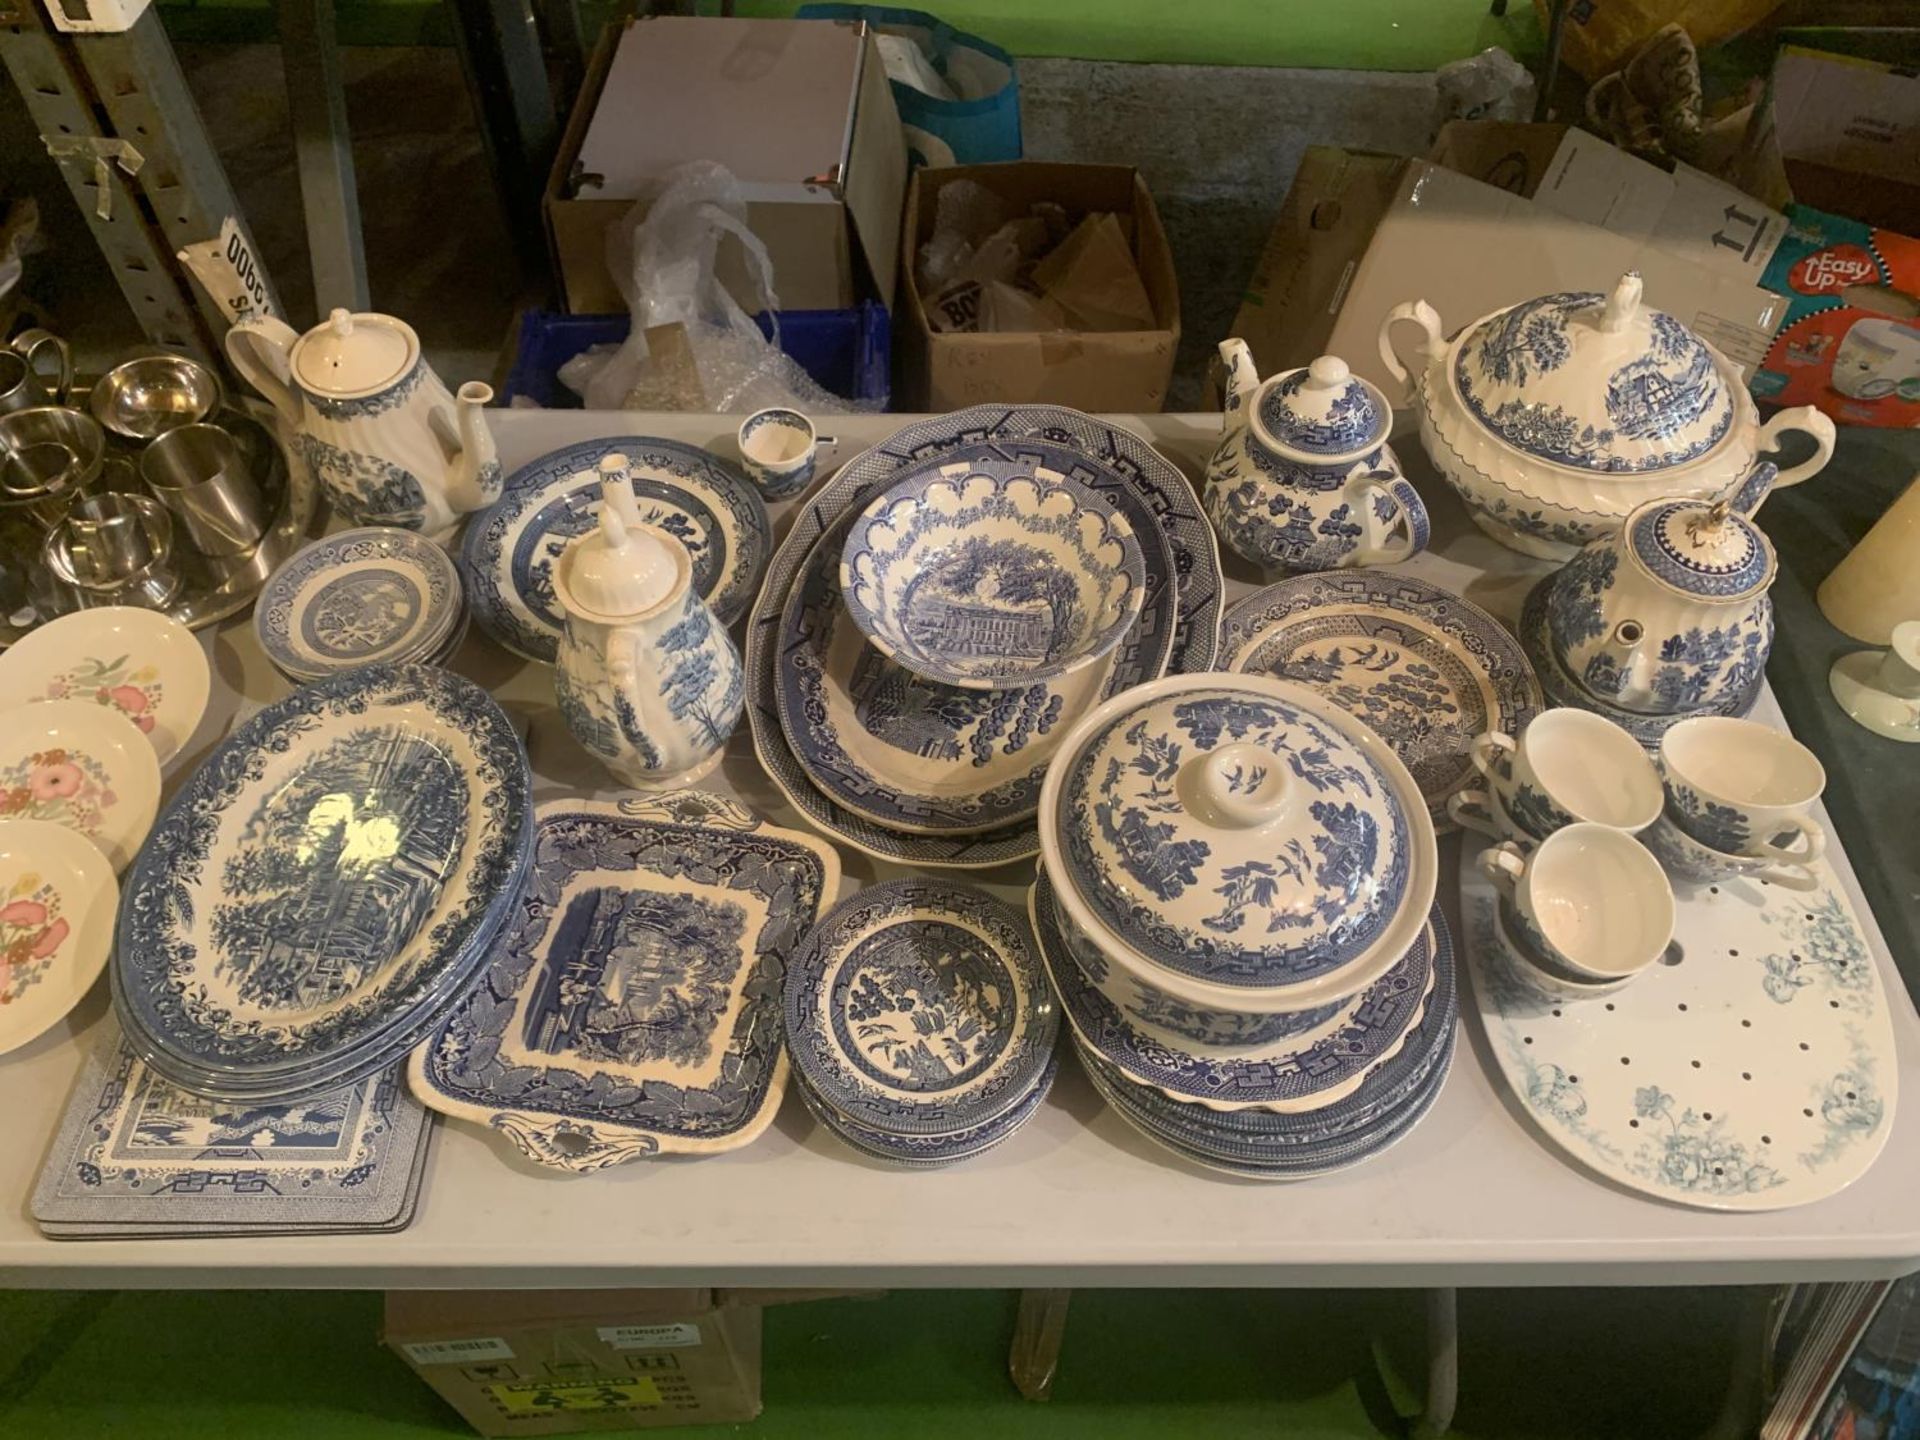 A LARGE ASSORTMENT OF BLUE AND WHITE DECORATIVE CERAMICS TO INCLUDE TEAPOTS, PLATES AND PLACE MATS